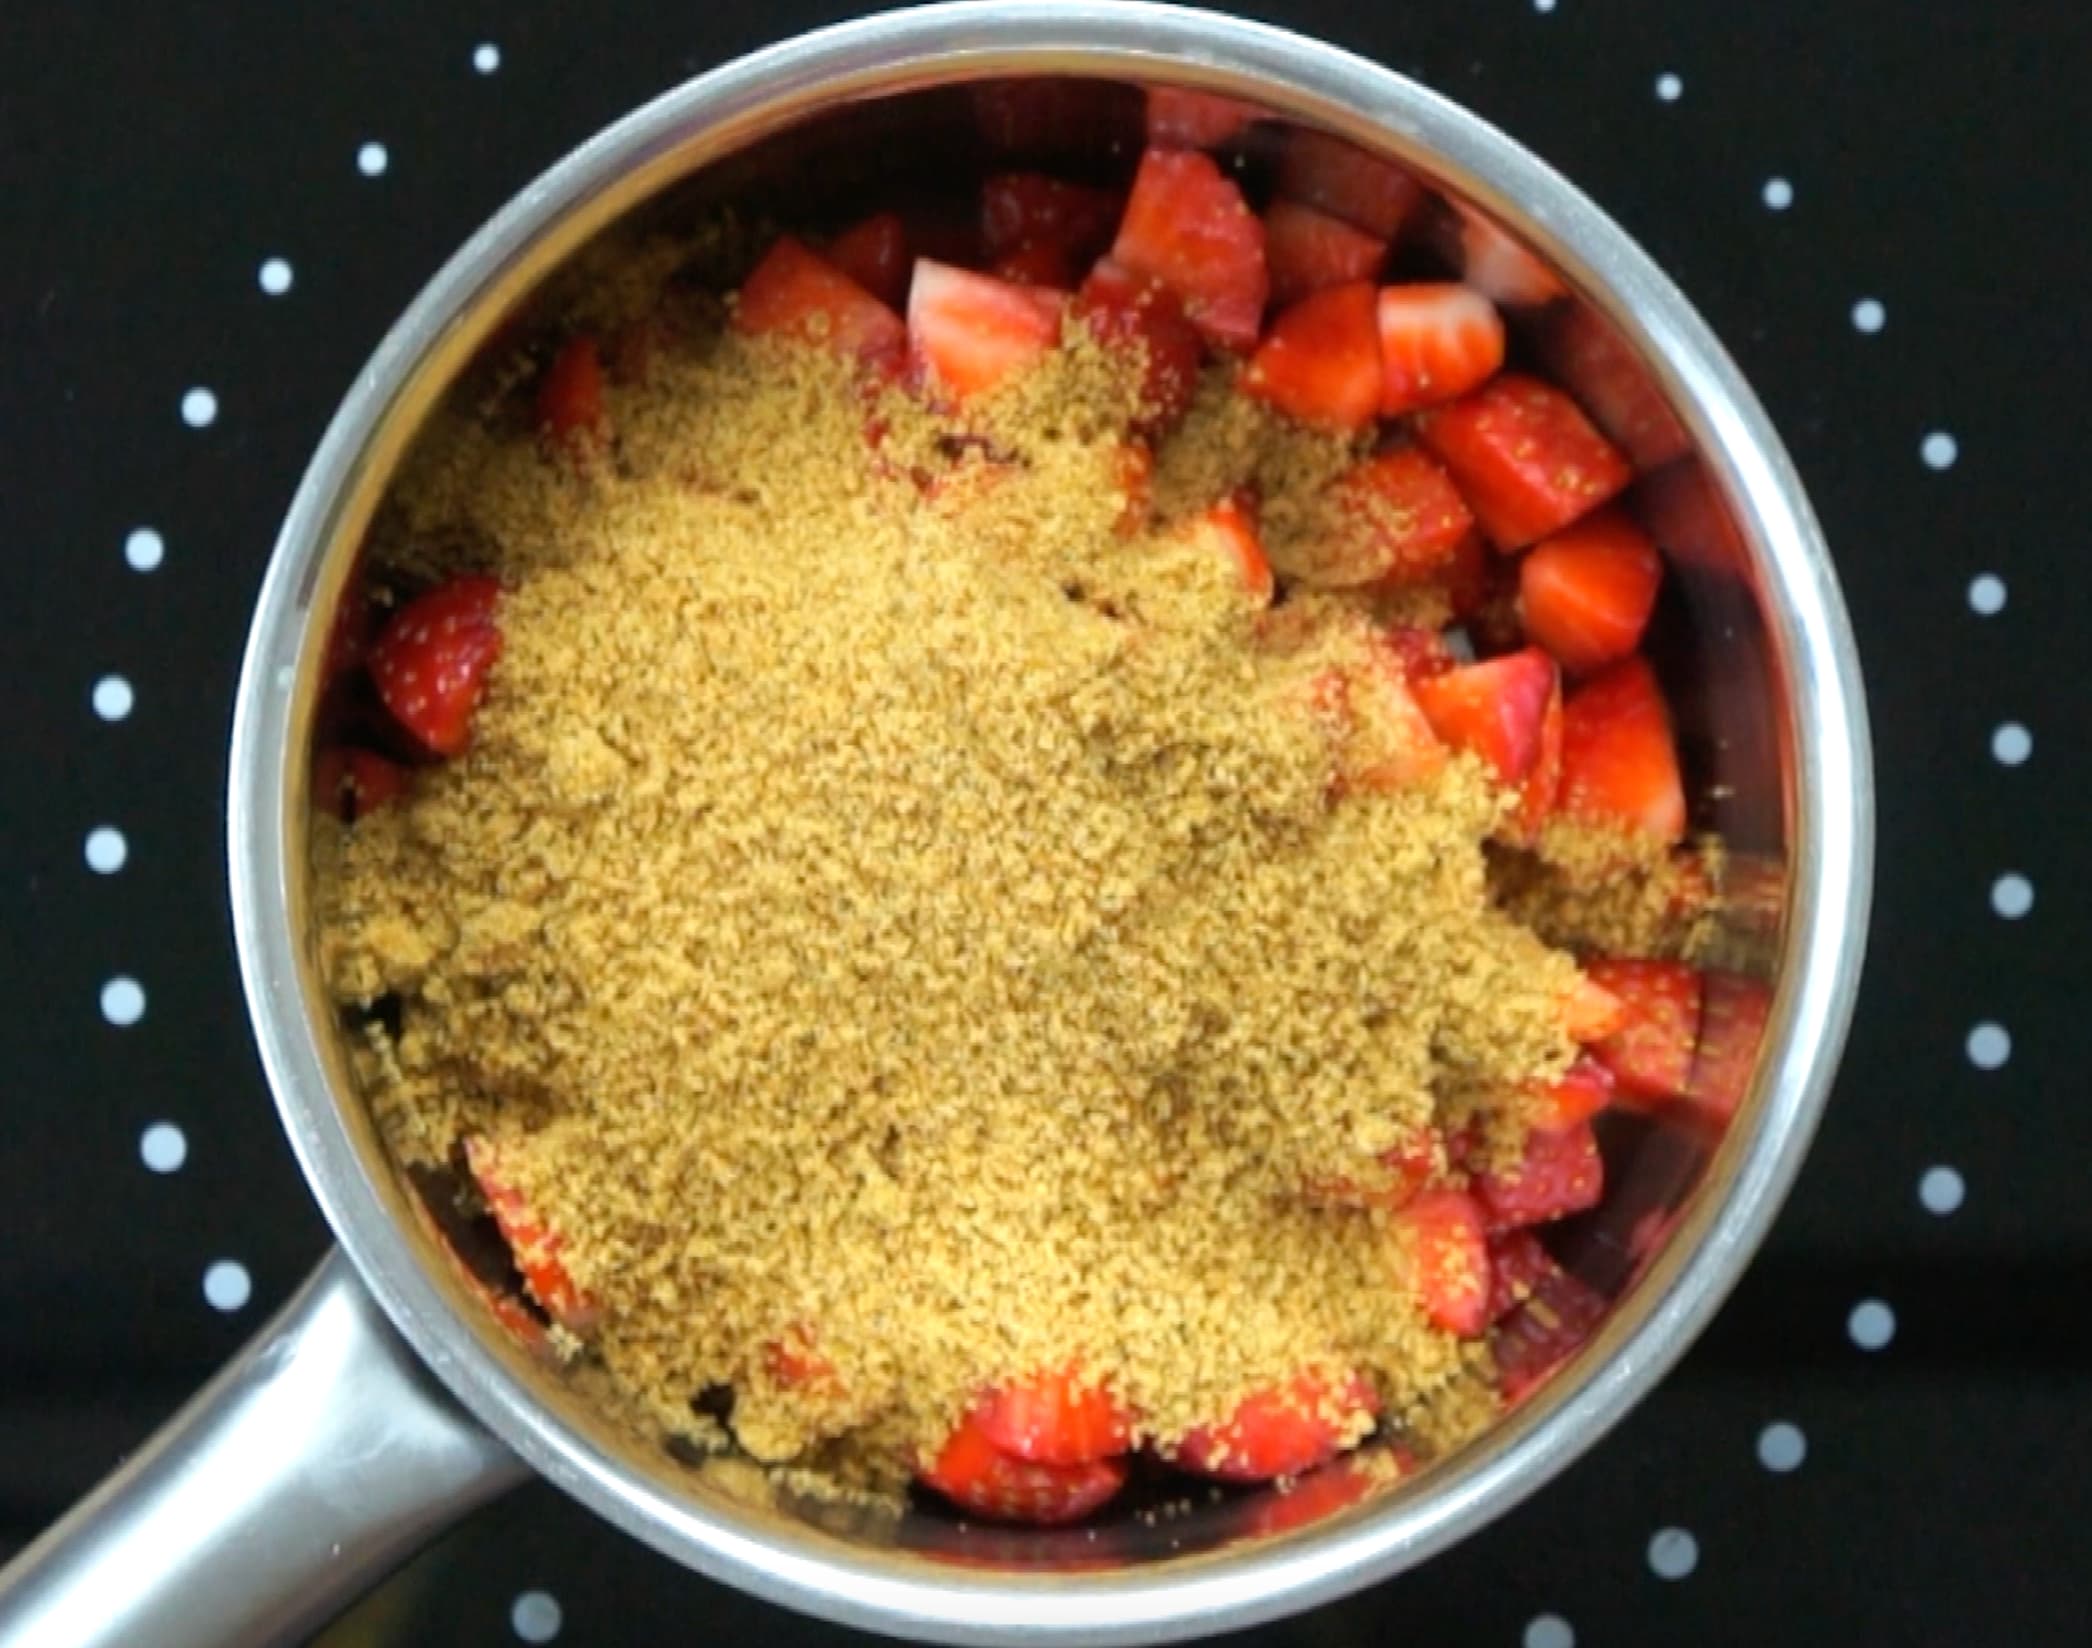 Strawberry pieces in a small saucepan with a heap of brown sugar.